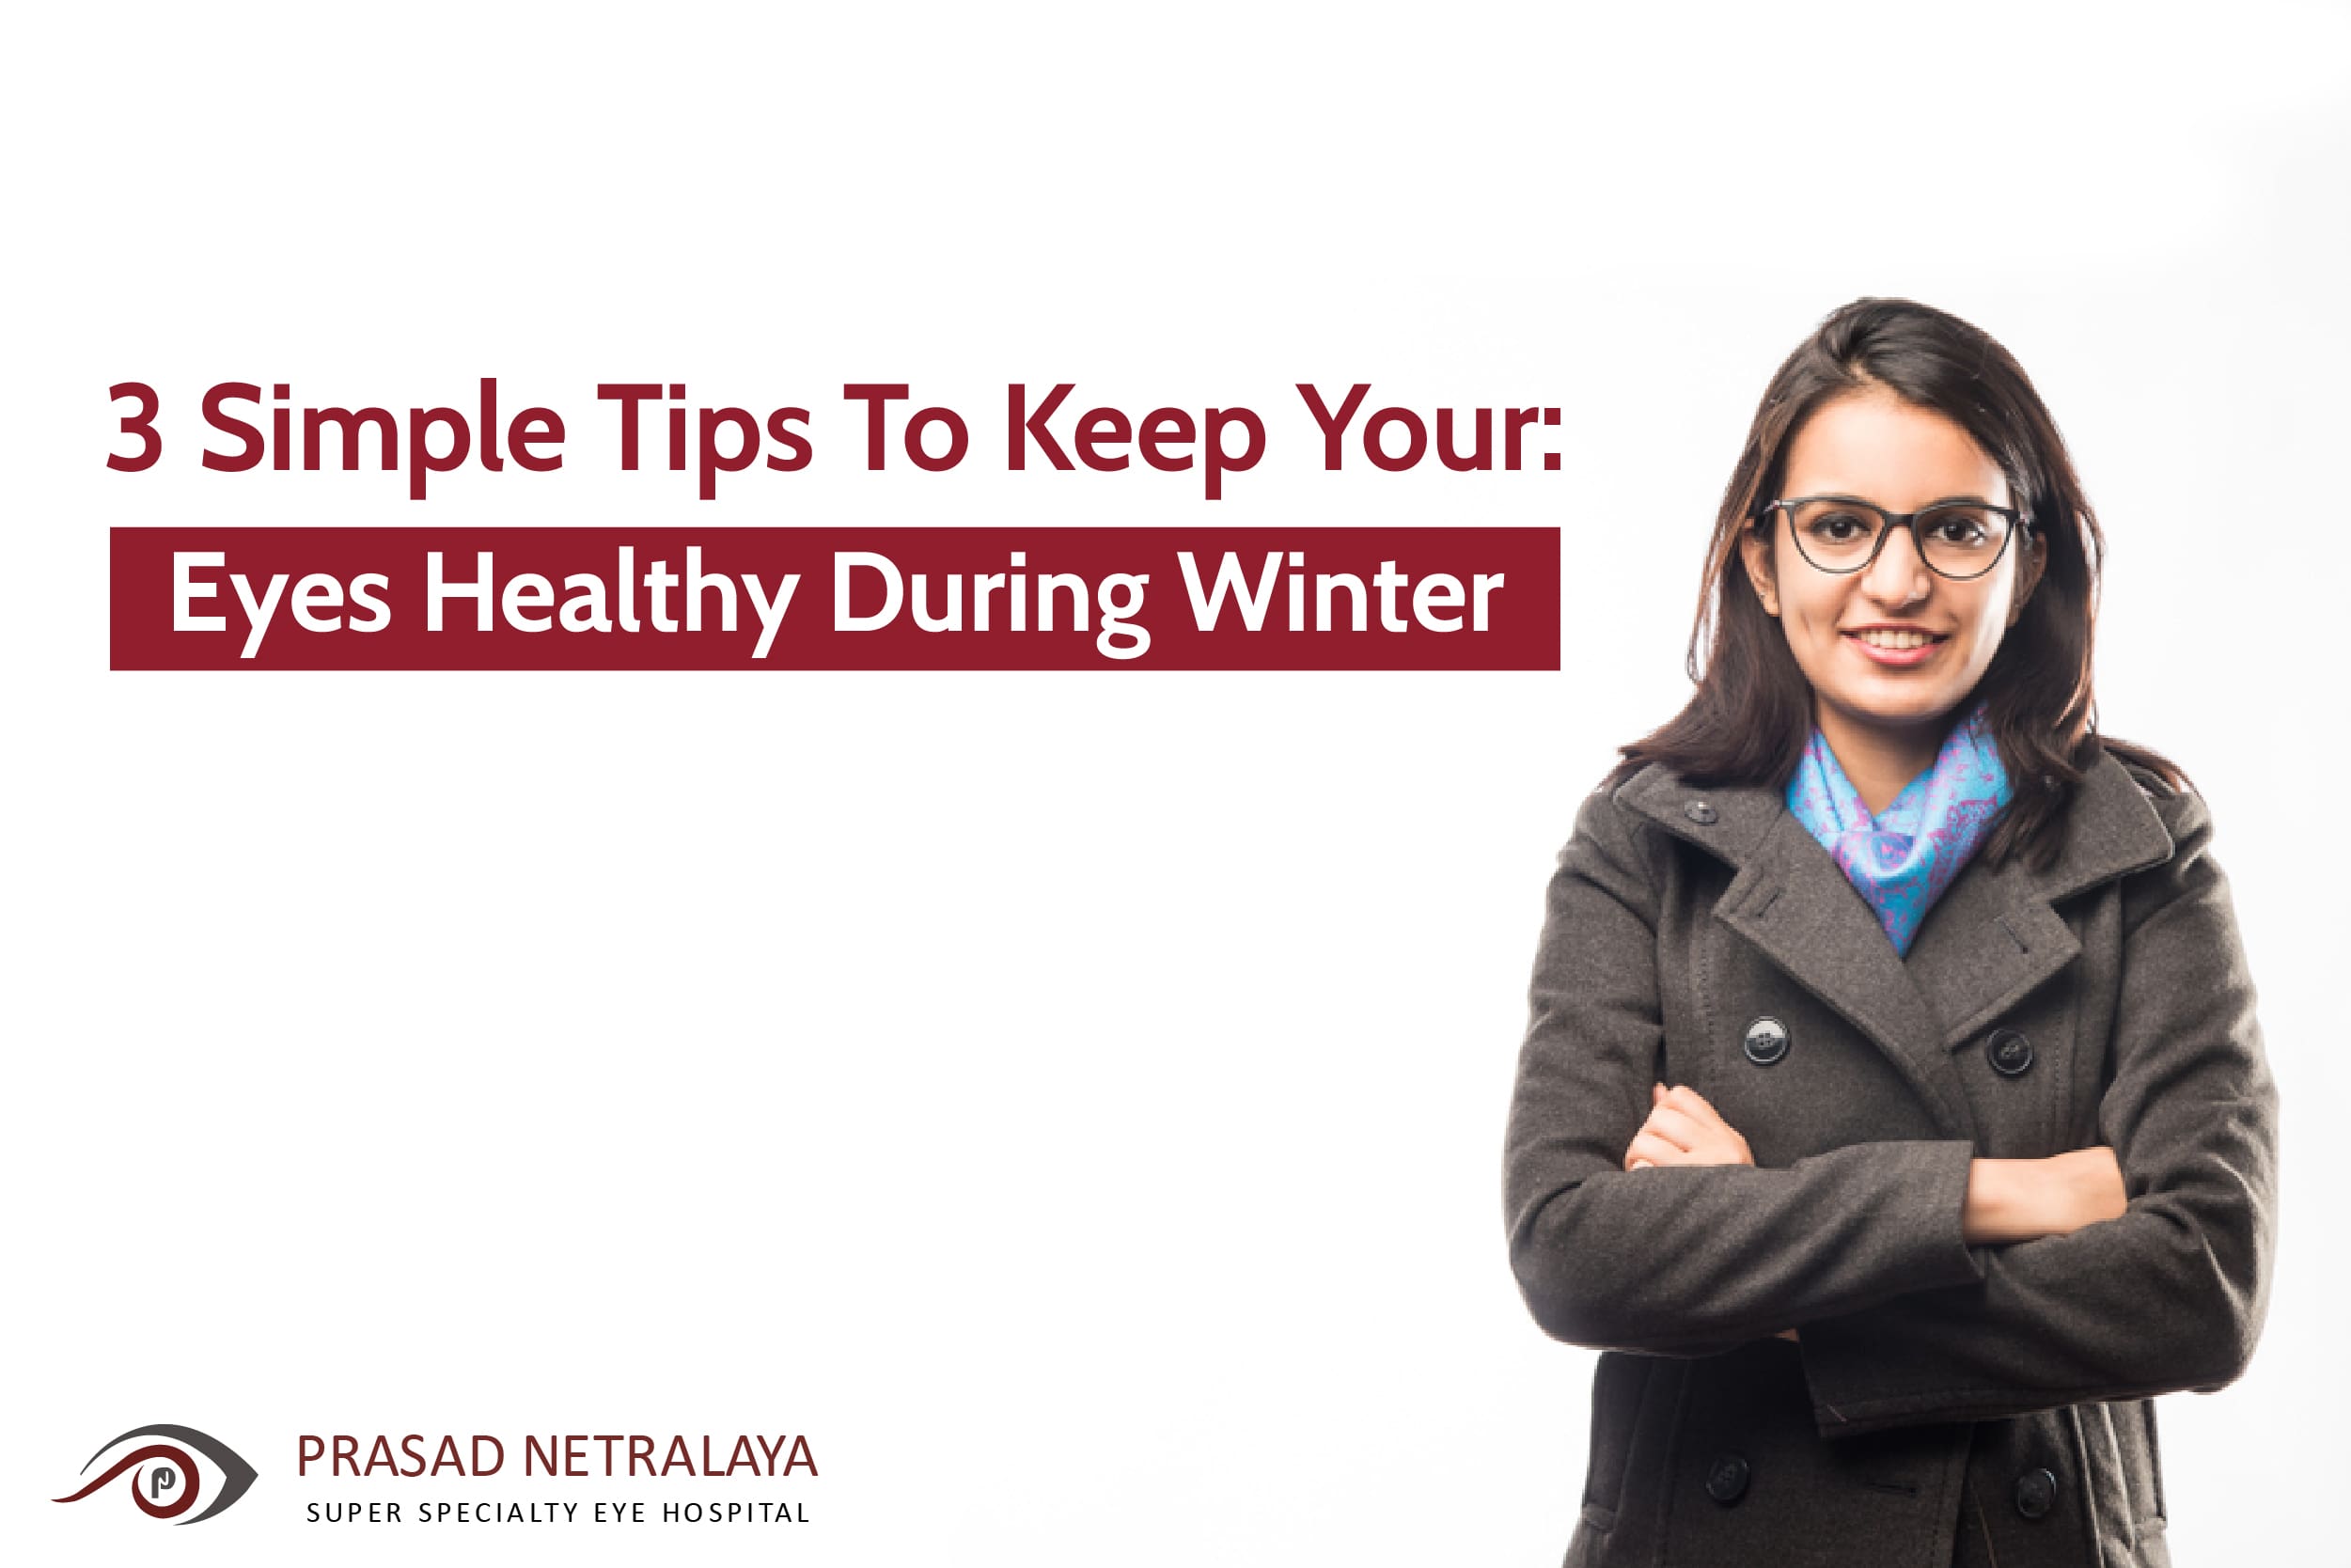 3 Simple Tips To Keep Your Eyes Healthy During Winter